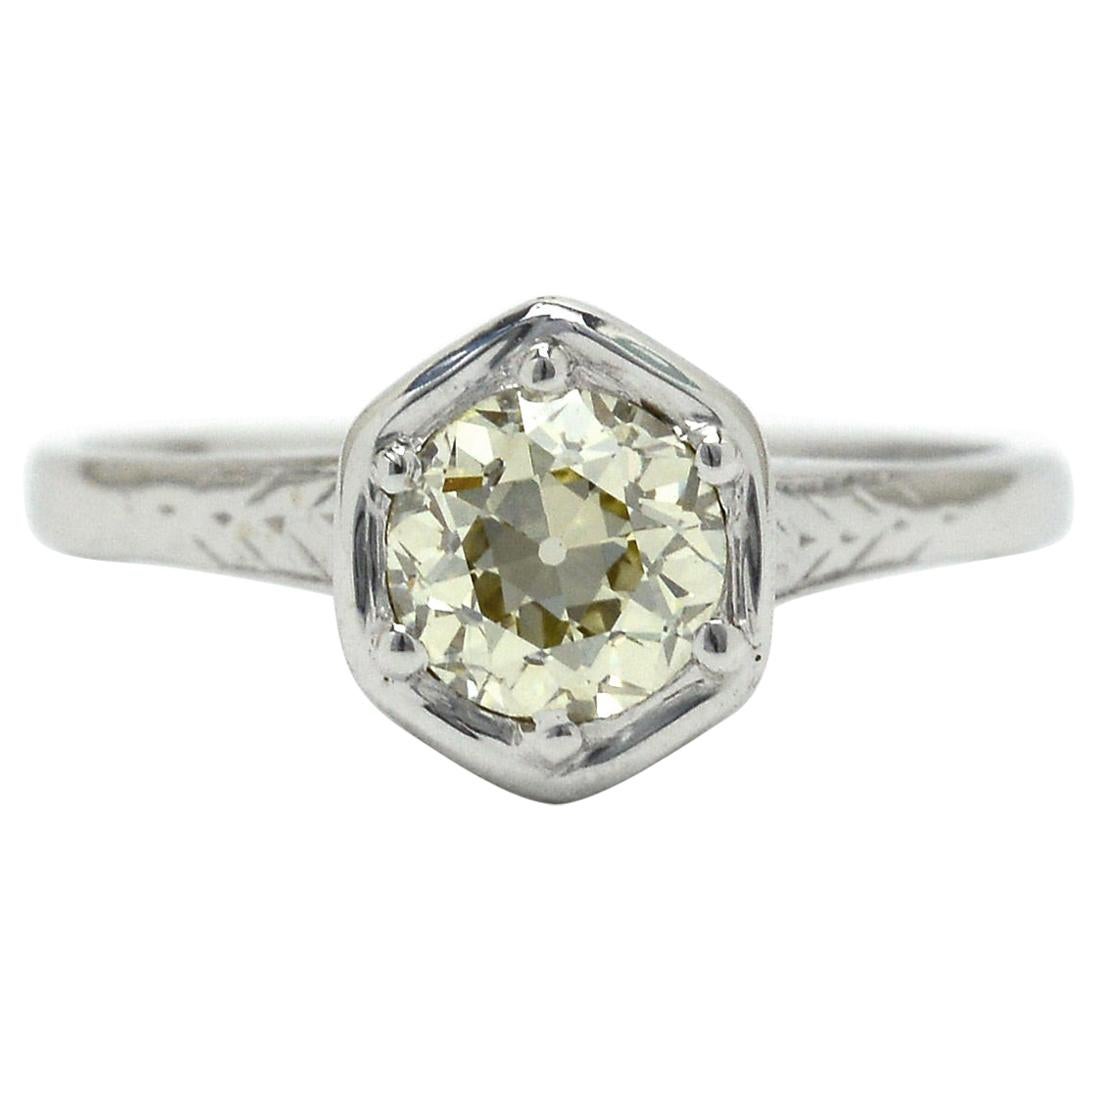 Antique Solitaire 14K White Gold Engagement Ring